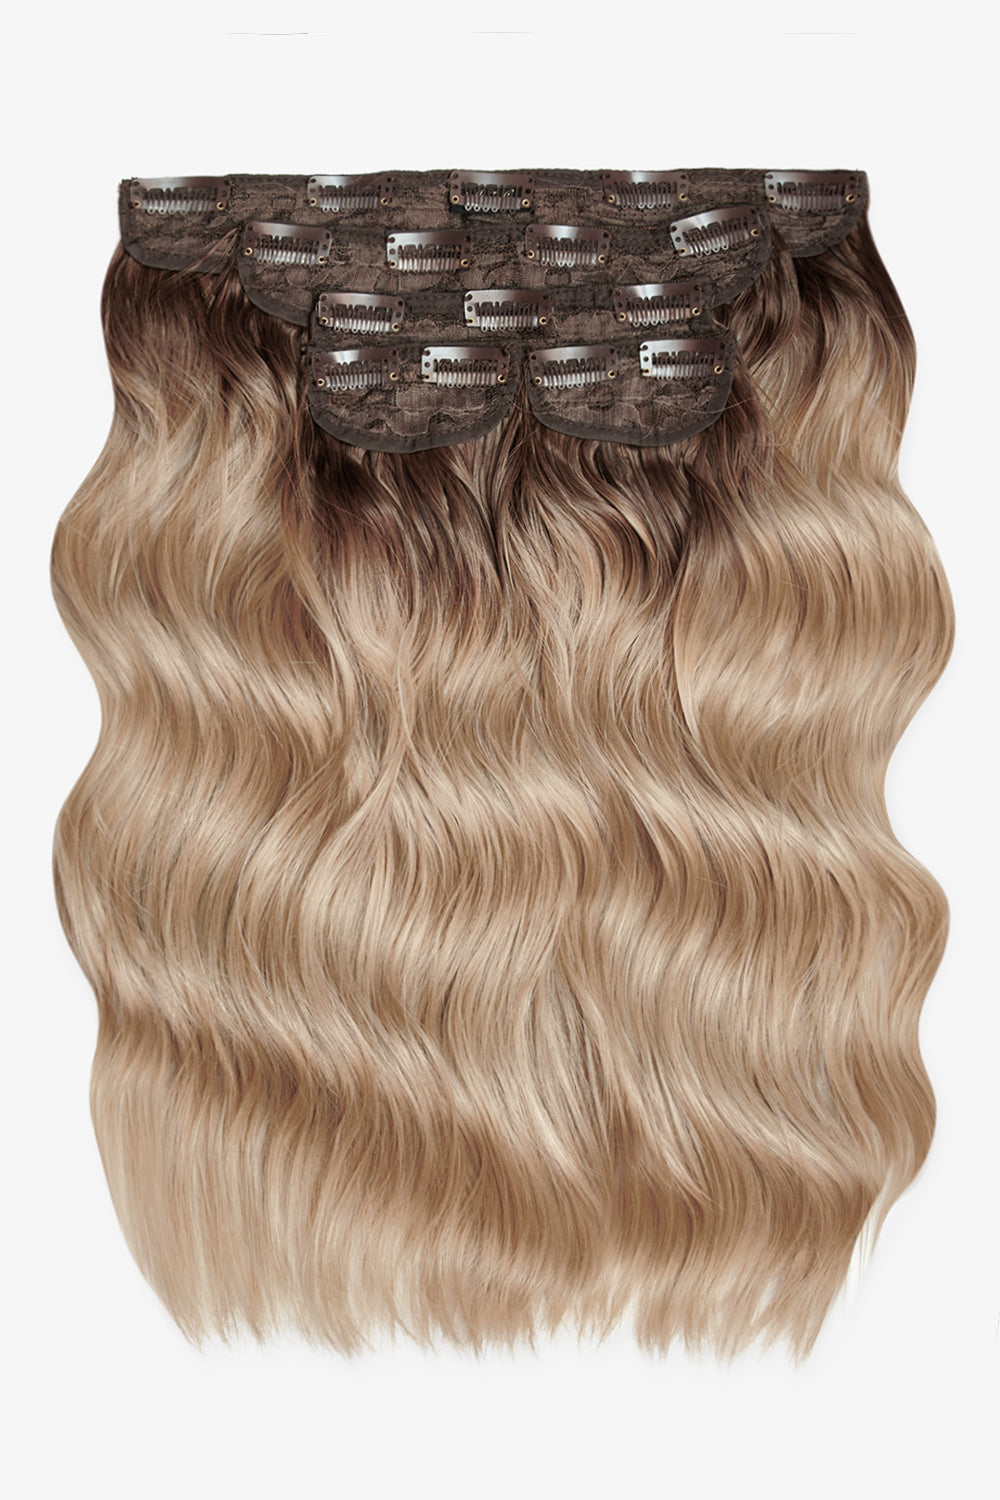 Super Thick 16’’ 5 Piece Brushed Out Wave Clip In Hair Extensions + Hair Care Bundle - Rooted California Blonde